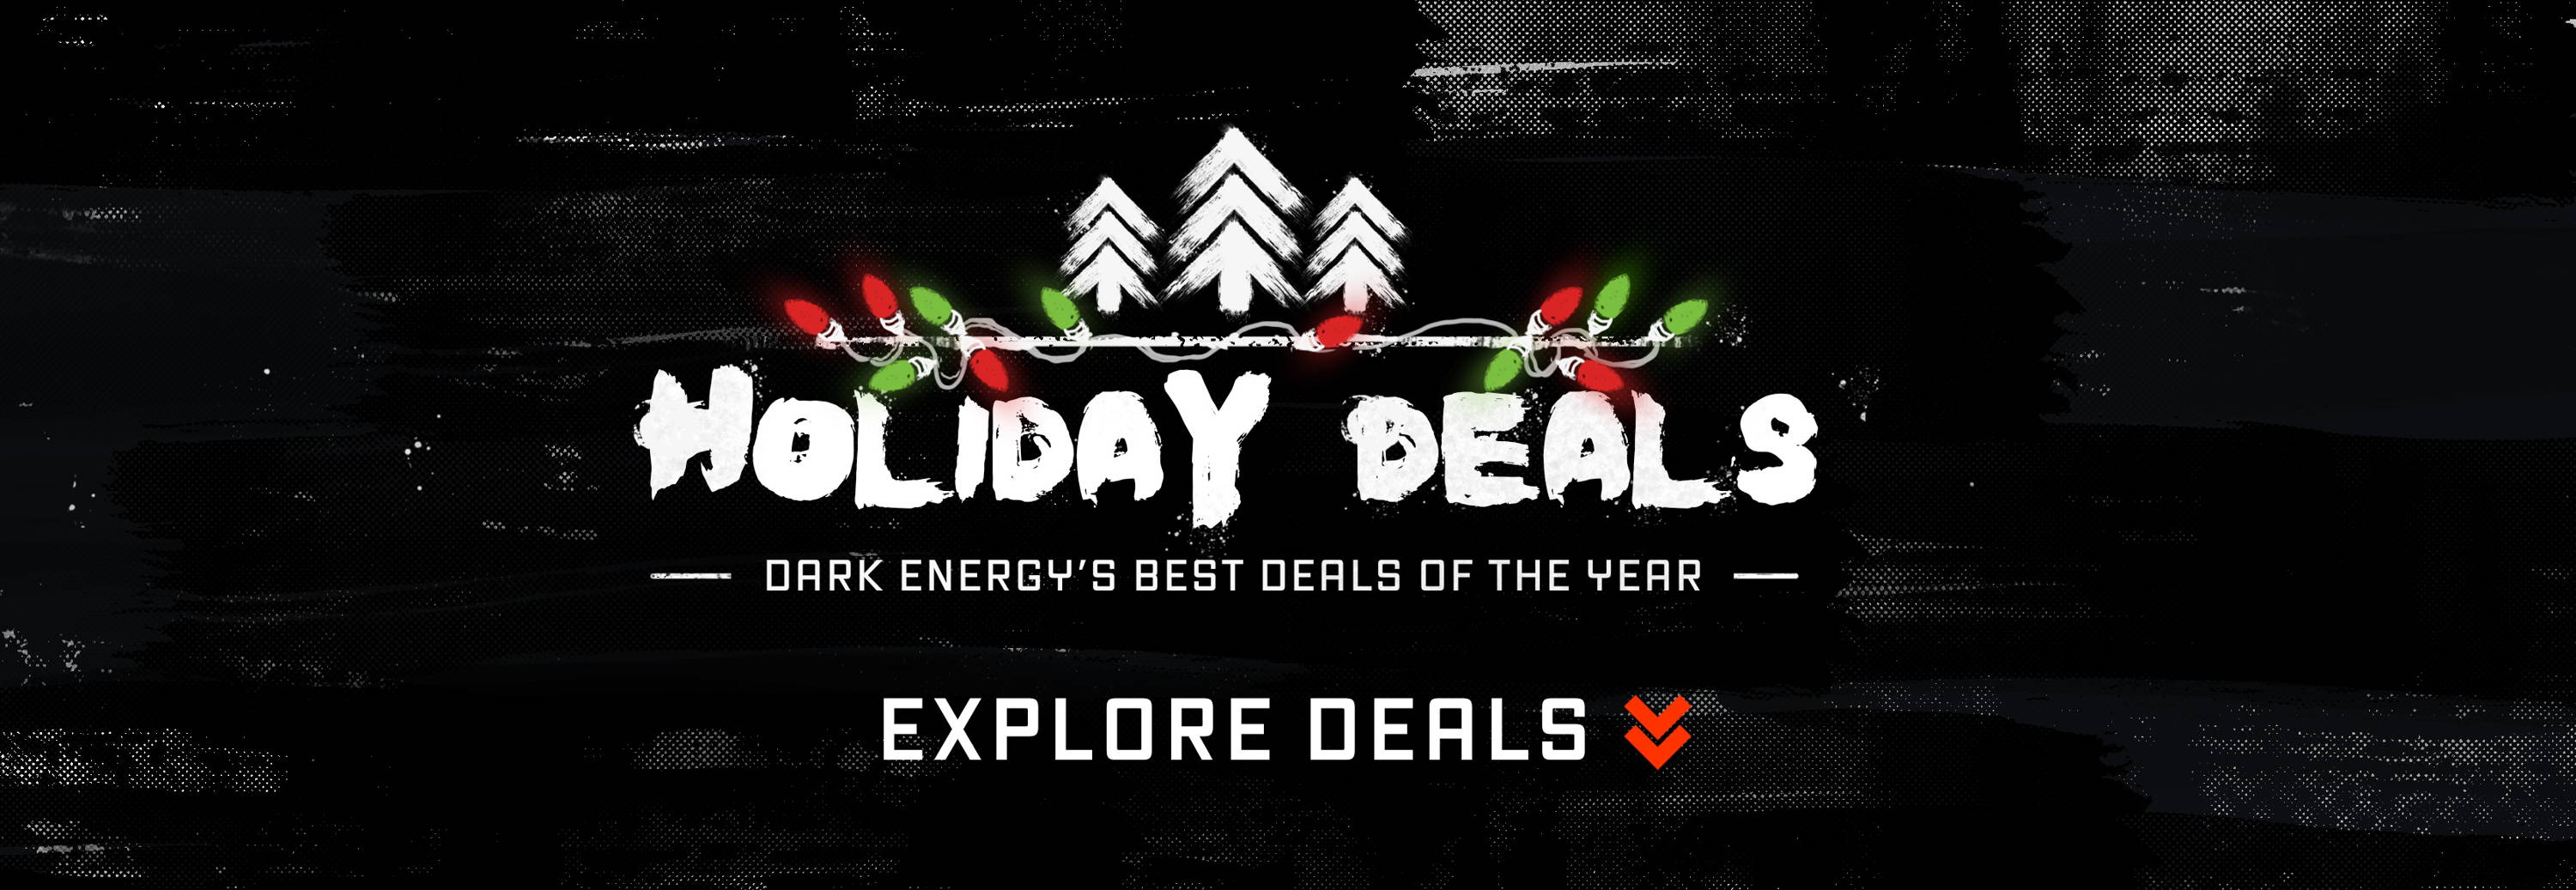 Dark energy's best deals of the year are happening right now!